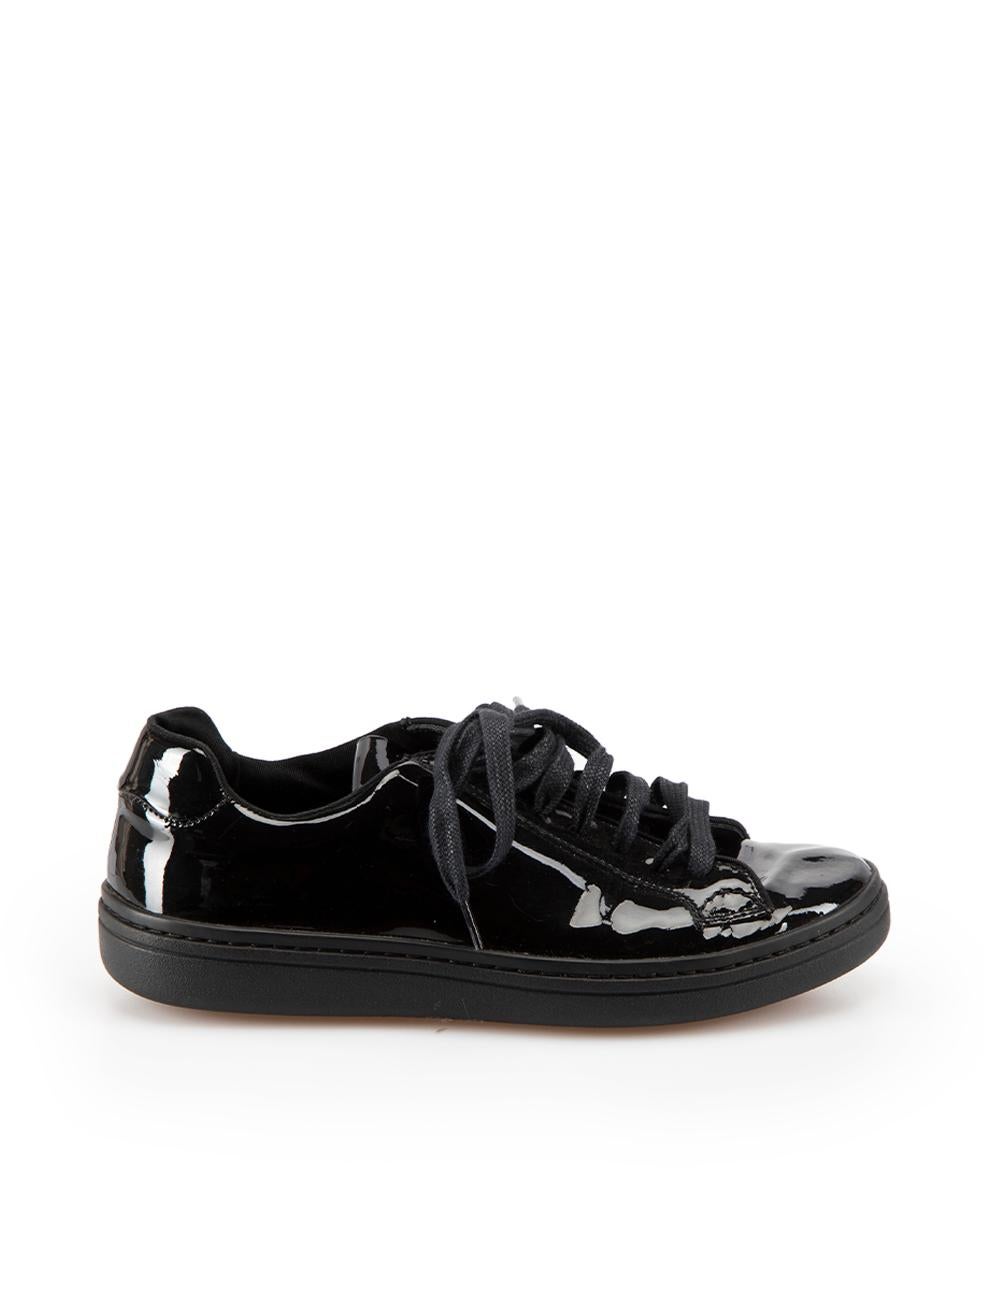 Black Patent Leather Lace-Up Trainers Size IT 36.5 For Sale